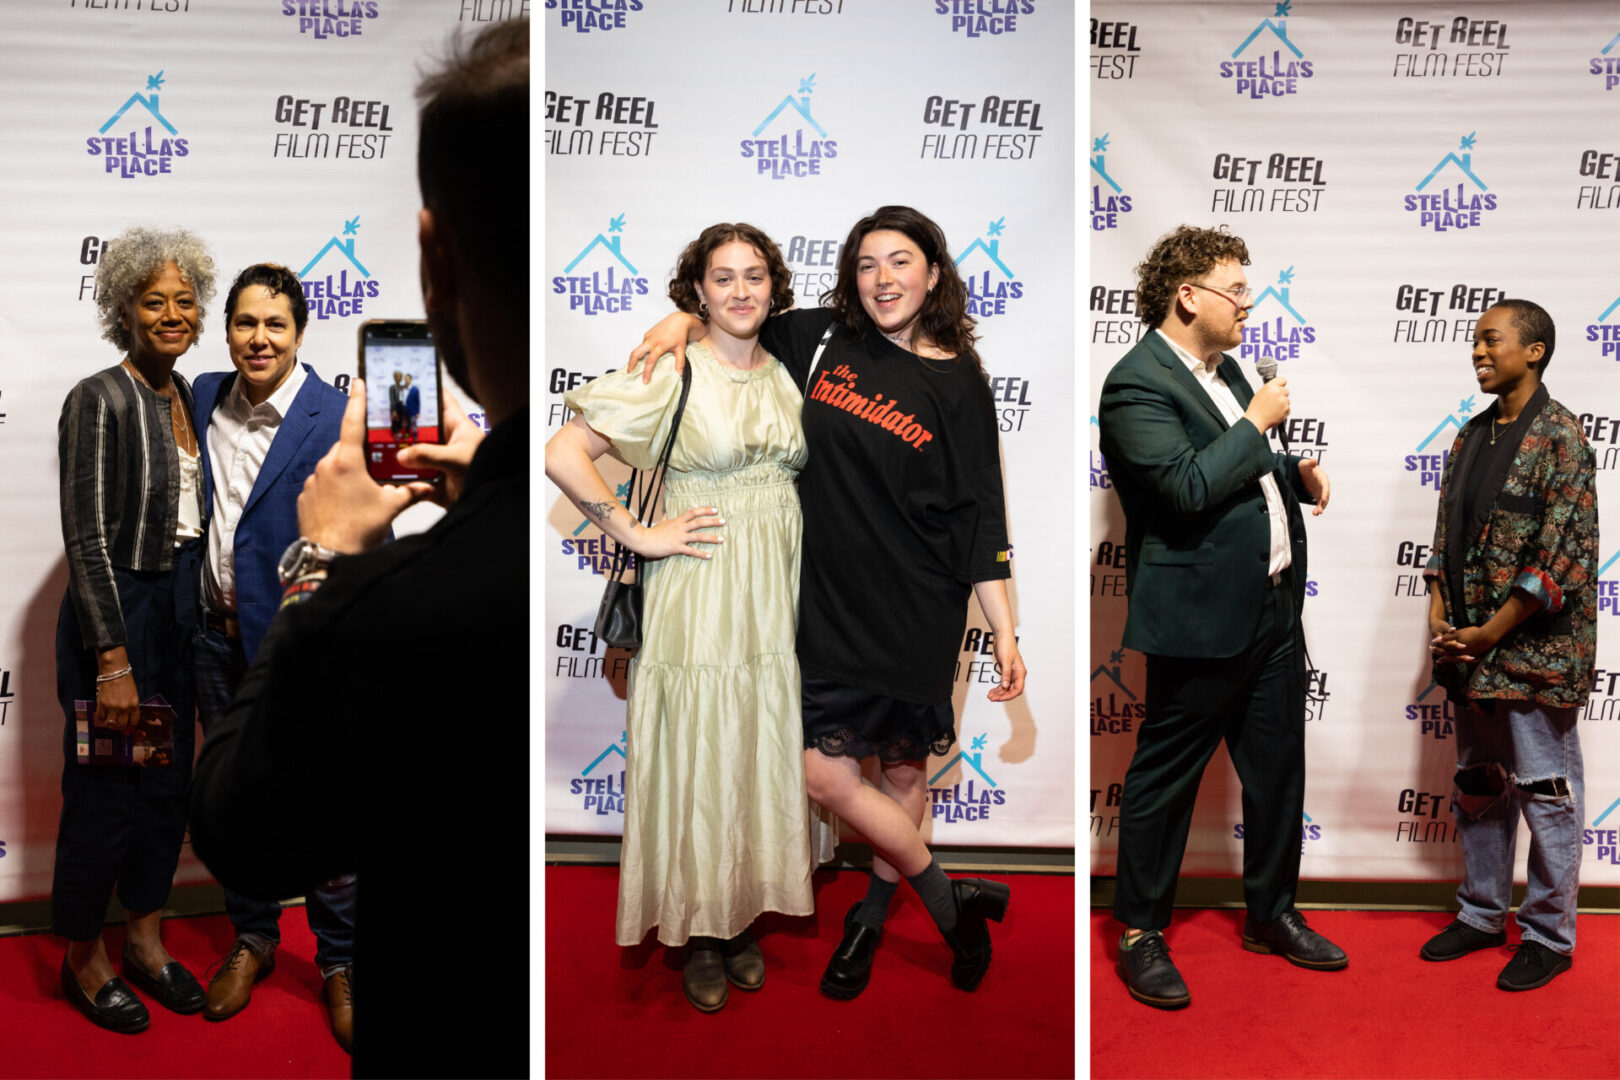 3 photos side by side of people on the red carpet at our opening night.